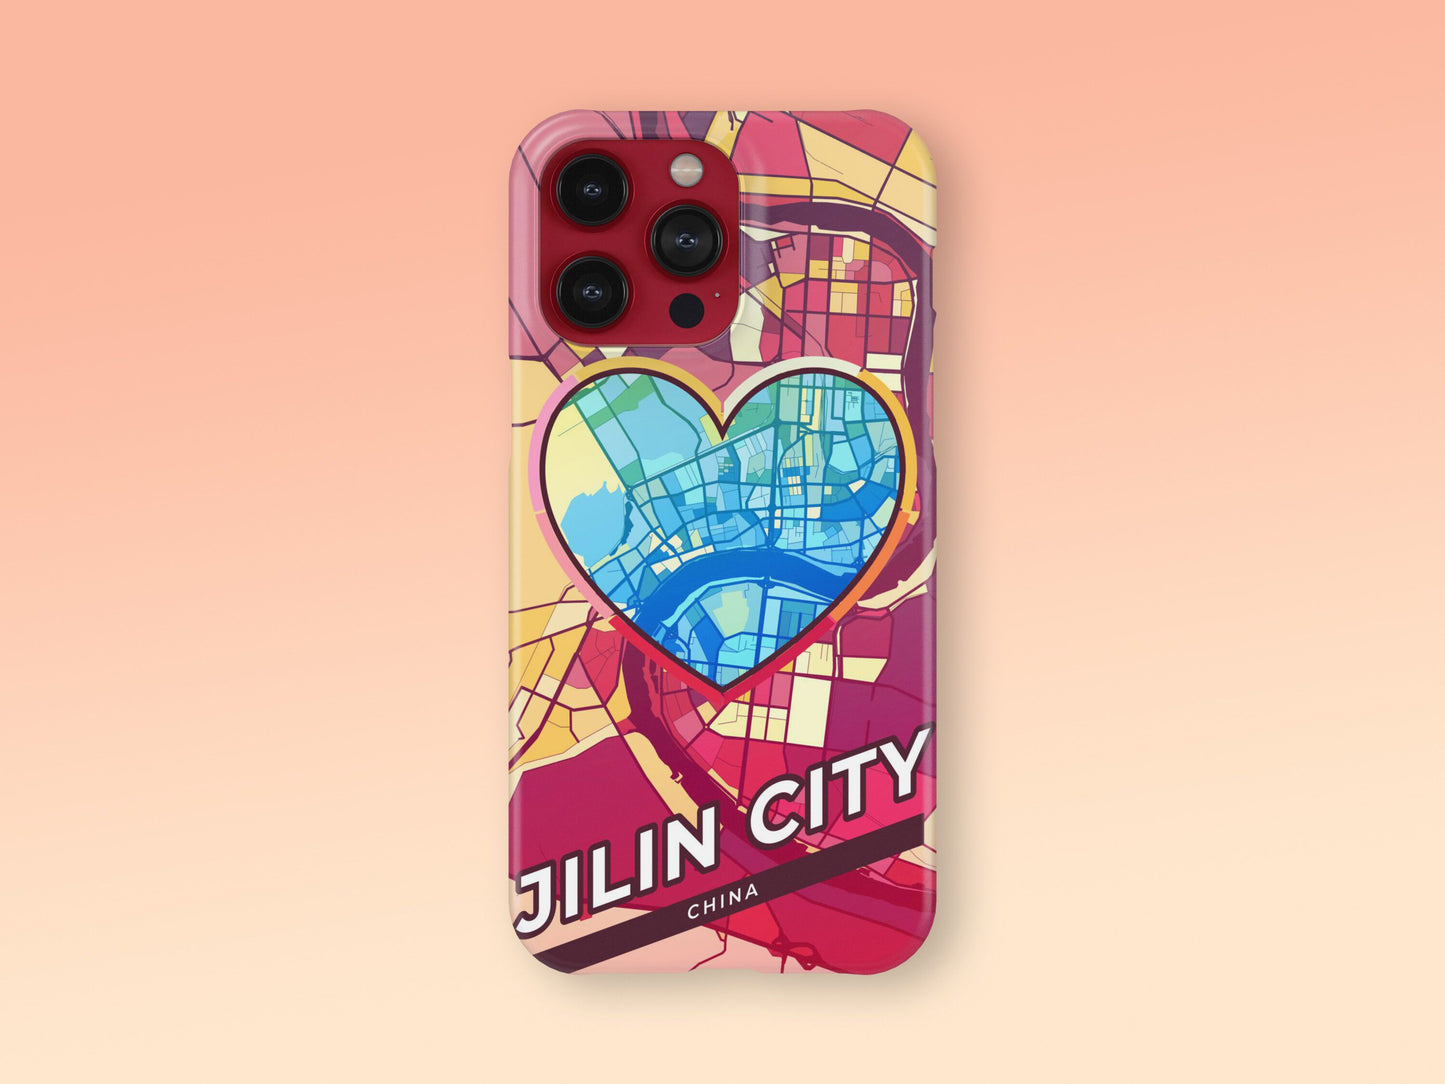 Jilin City China slim phone case with colorful icon. Birthday, wedding or housewarming gift. Couple match cases. 2